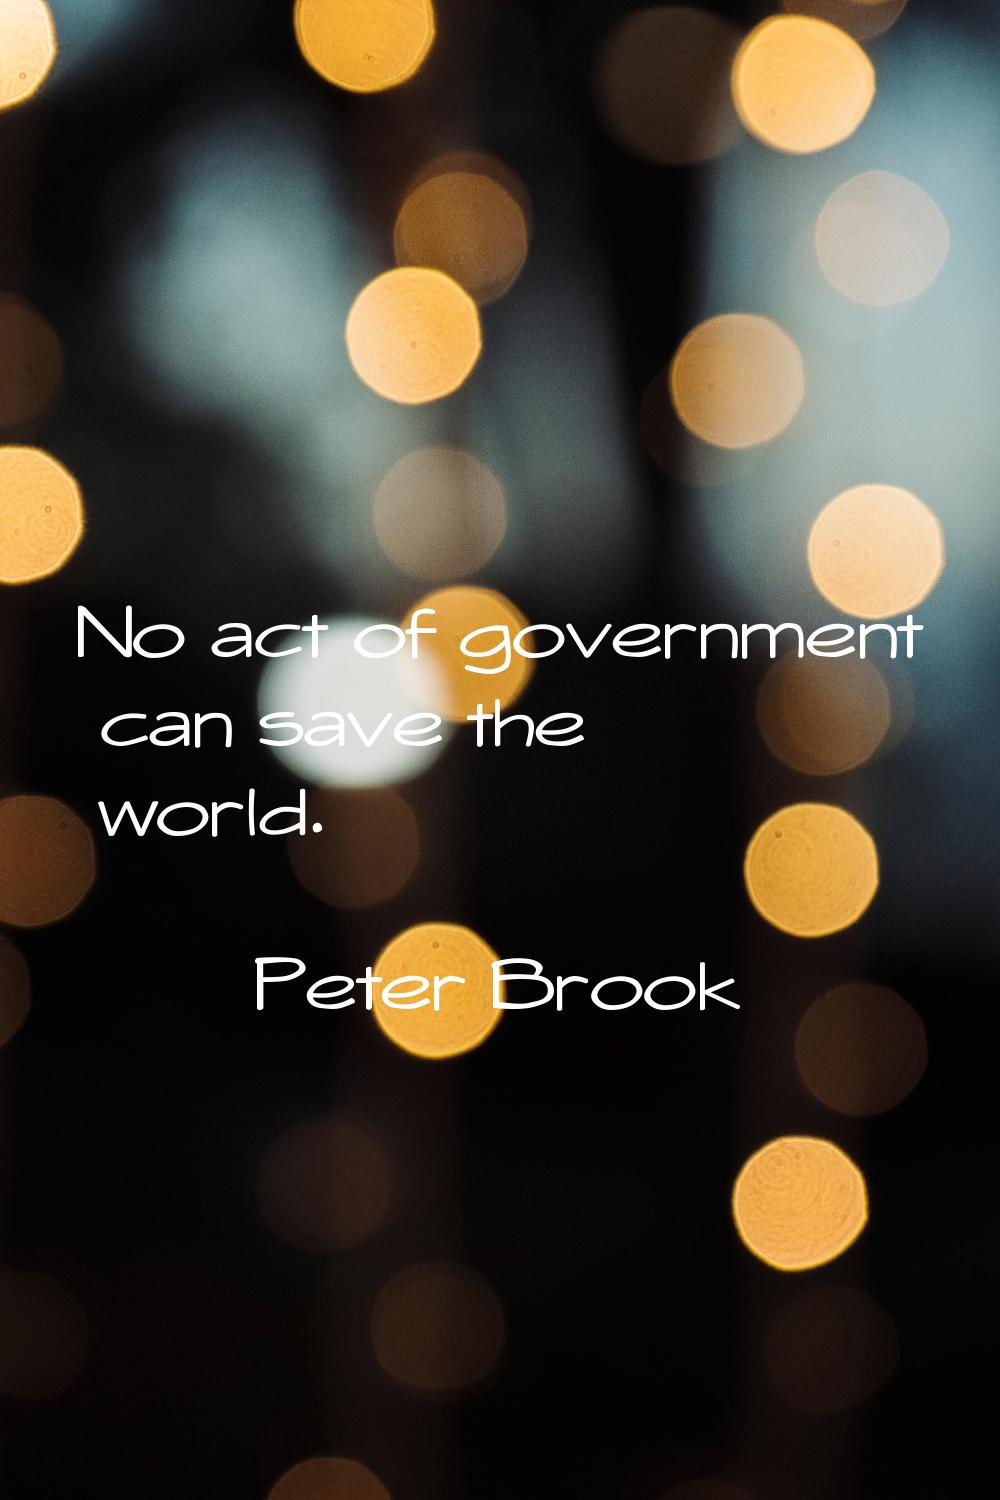 No act of government can save the world.